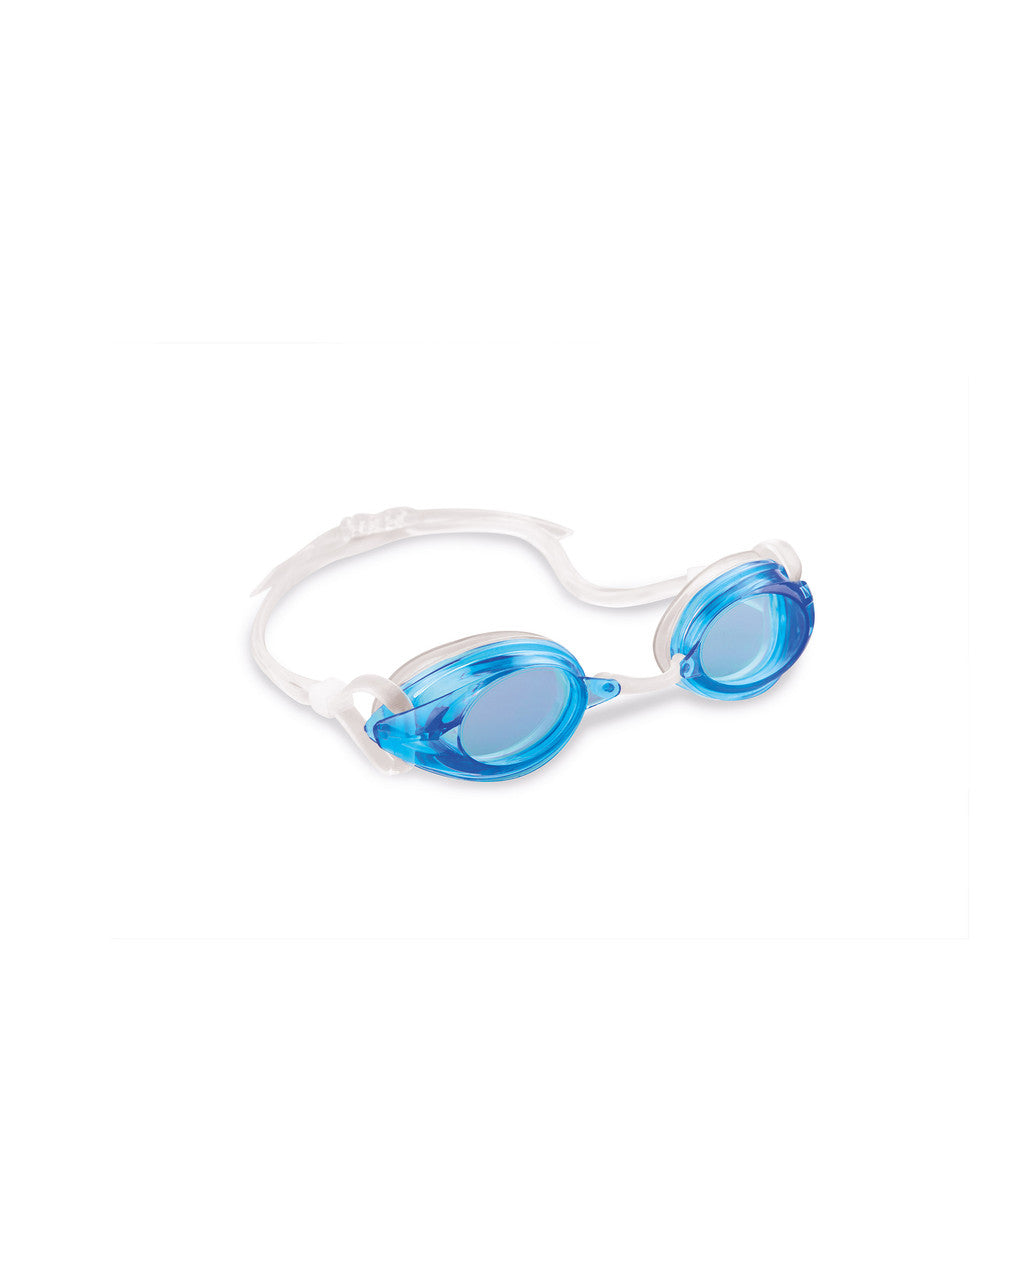 Inetx Sport Relay Swimming Goggles